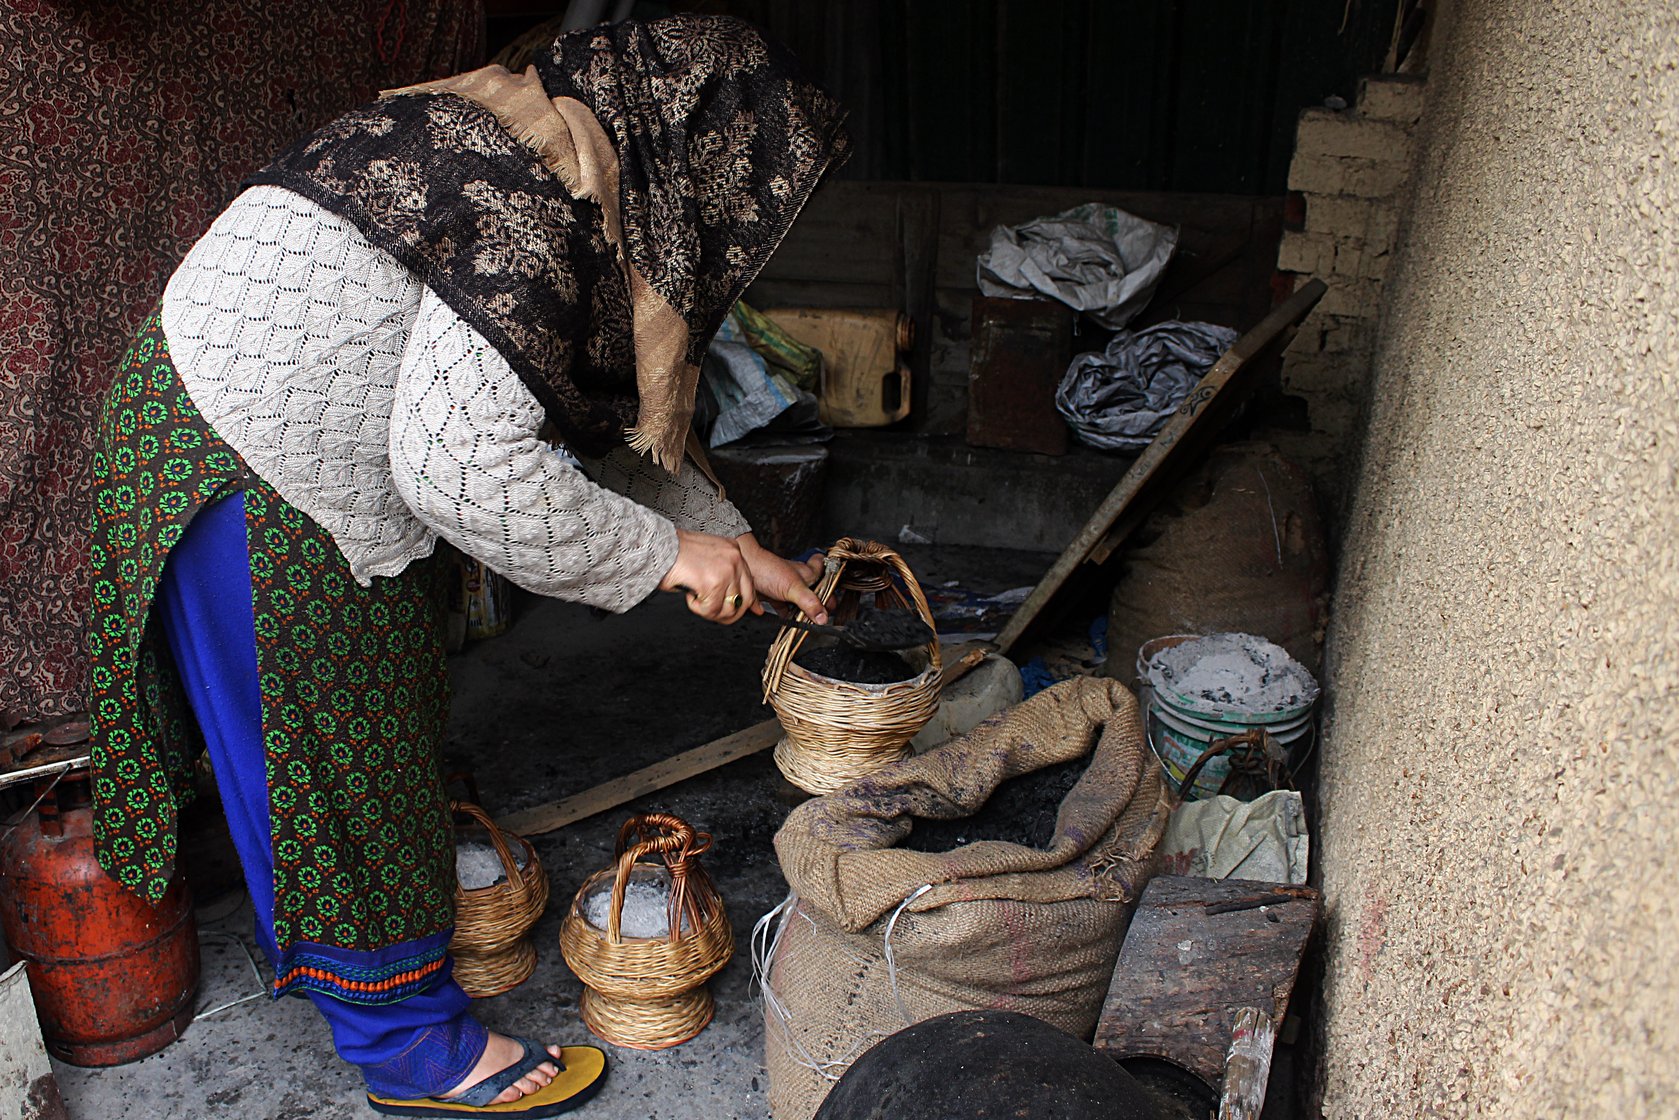 Firdousa Wani, 55, who lives in the Nawakadal area of Srinagar city, filling a kangri with charcoal in a shed (locally called ganjeen) outside her house early one morning